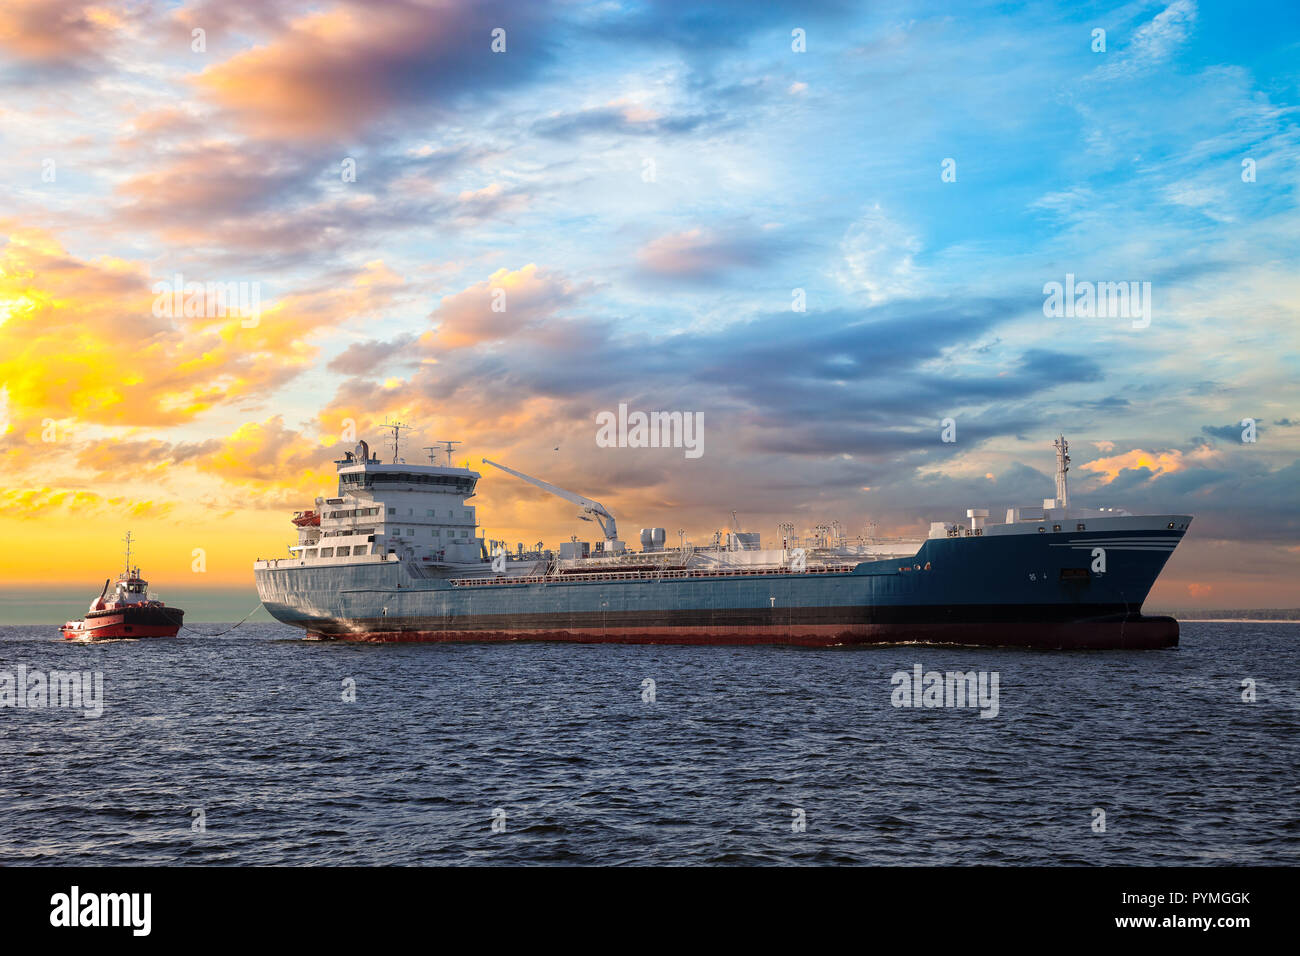 Tanker and tugboat on sea at sunset Stock Photo